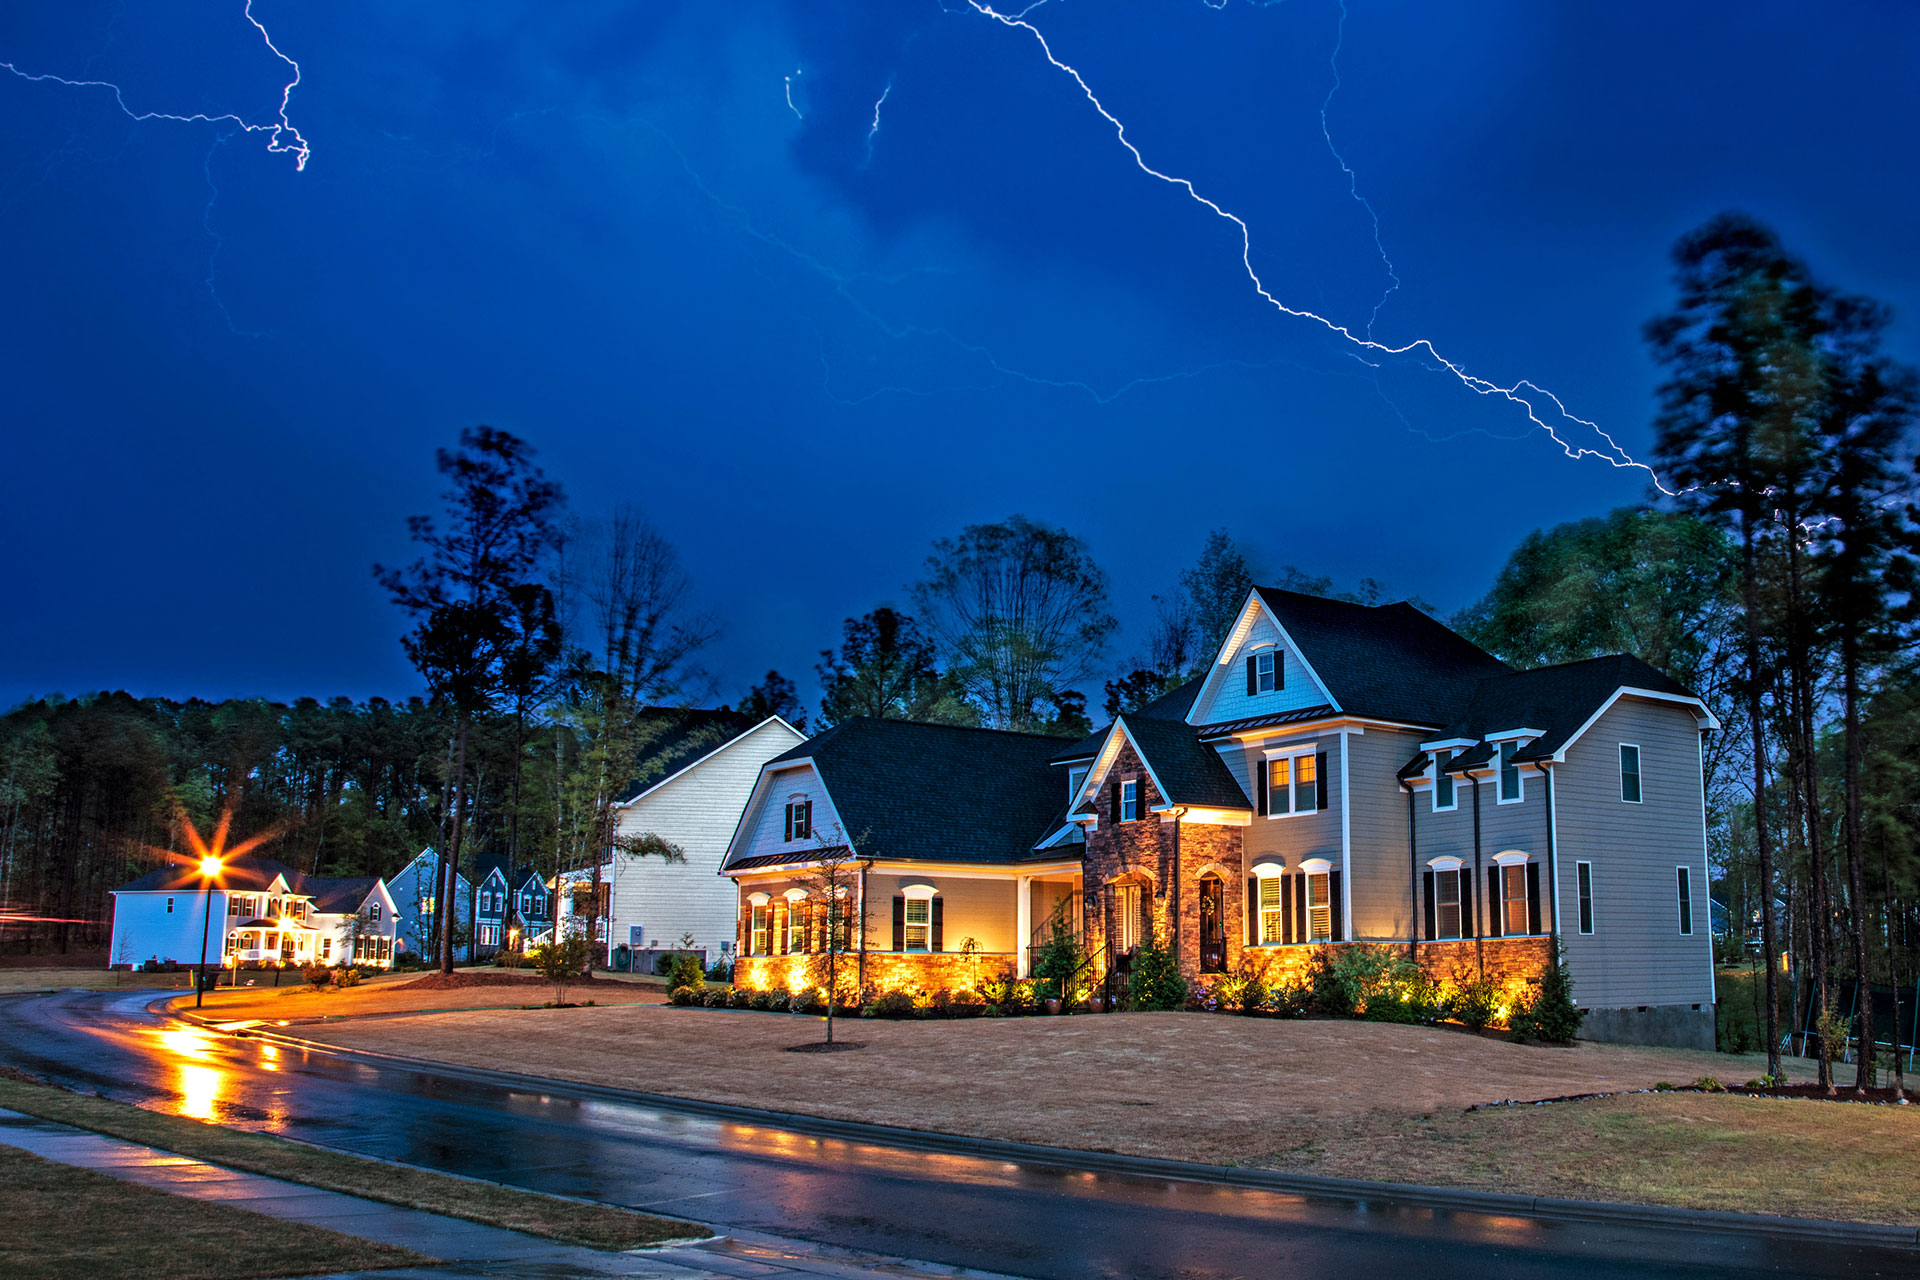 A lightning bolt flashes across the sky during a storm, but the house in the forefront is still lit with power thanks to a generator